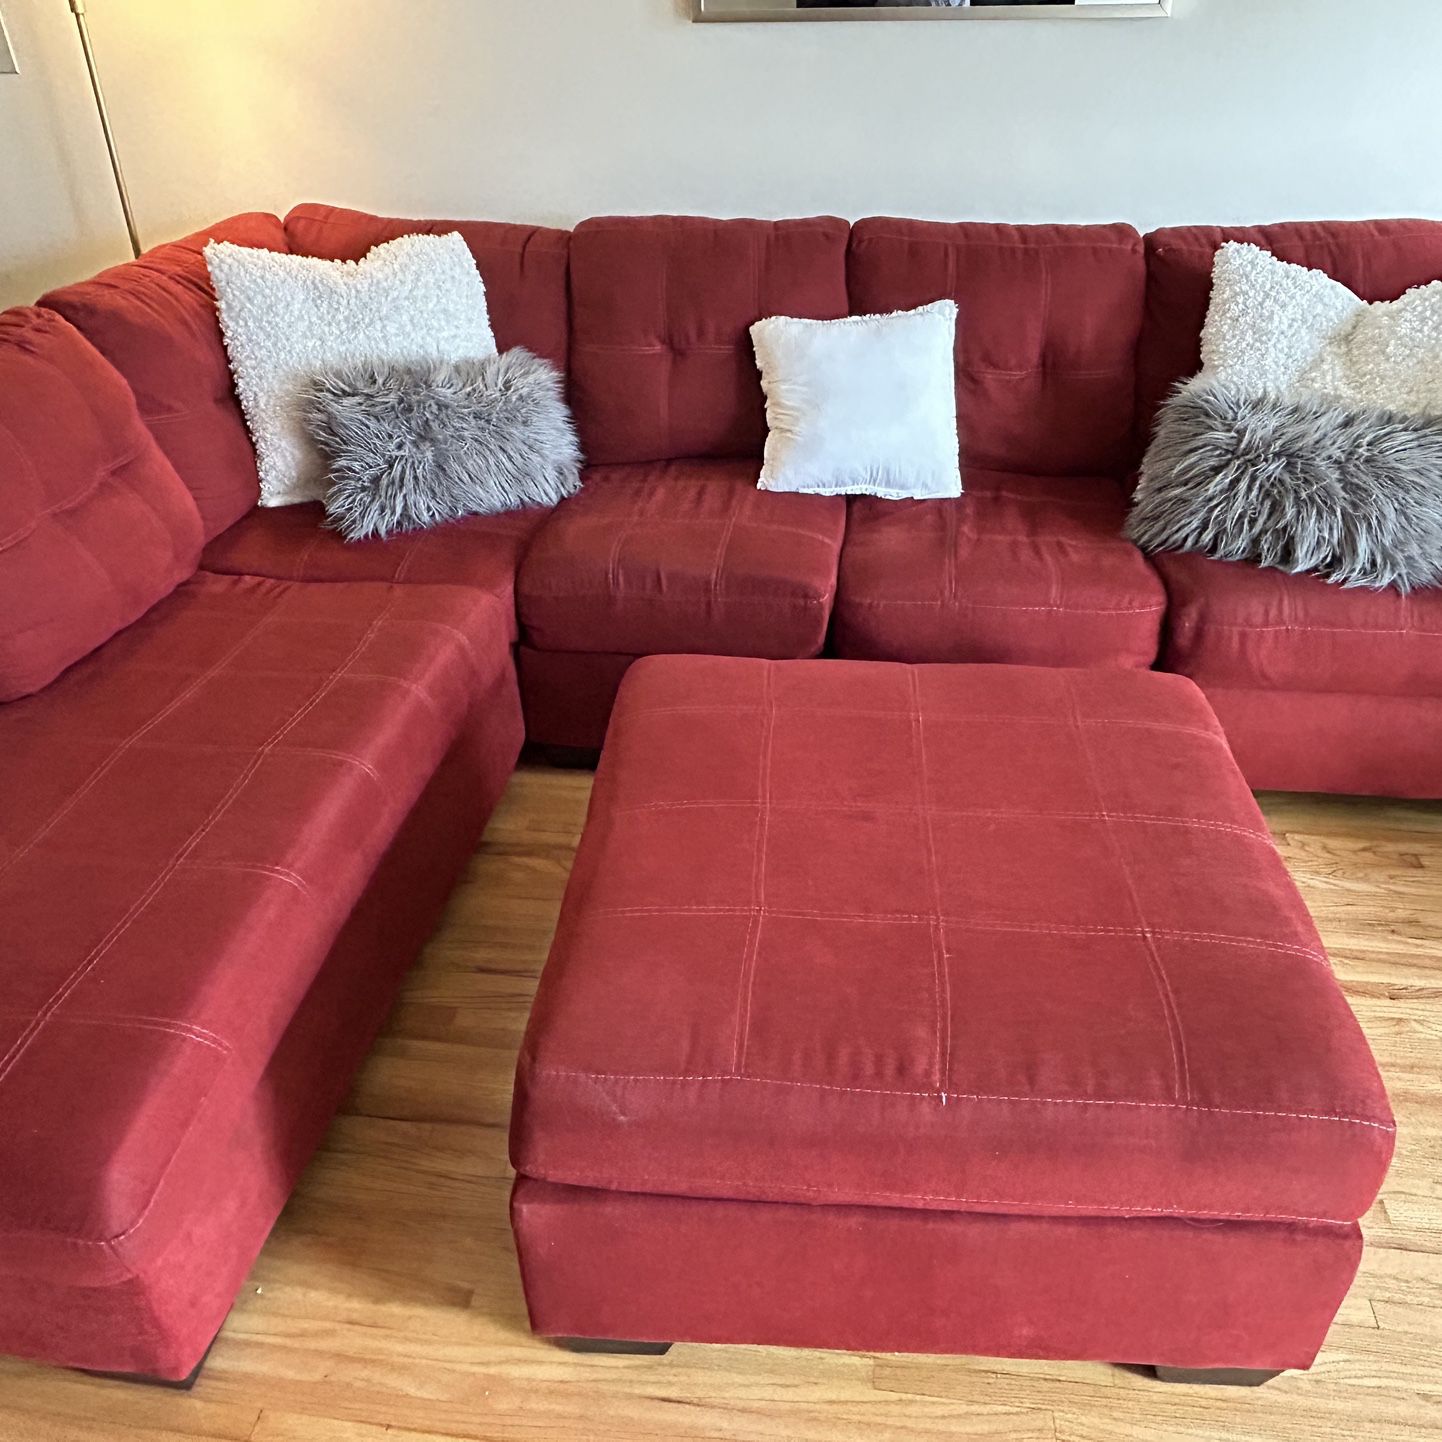 Large Red Sleeper Couch With Ottoman